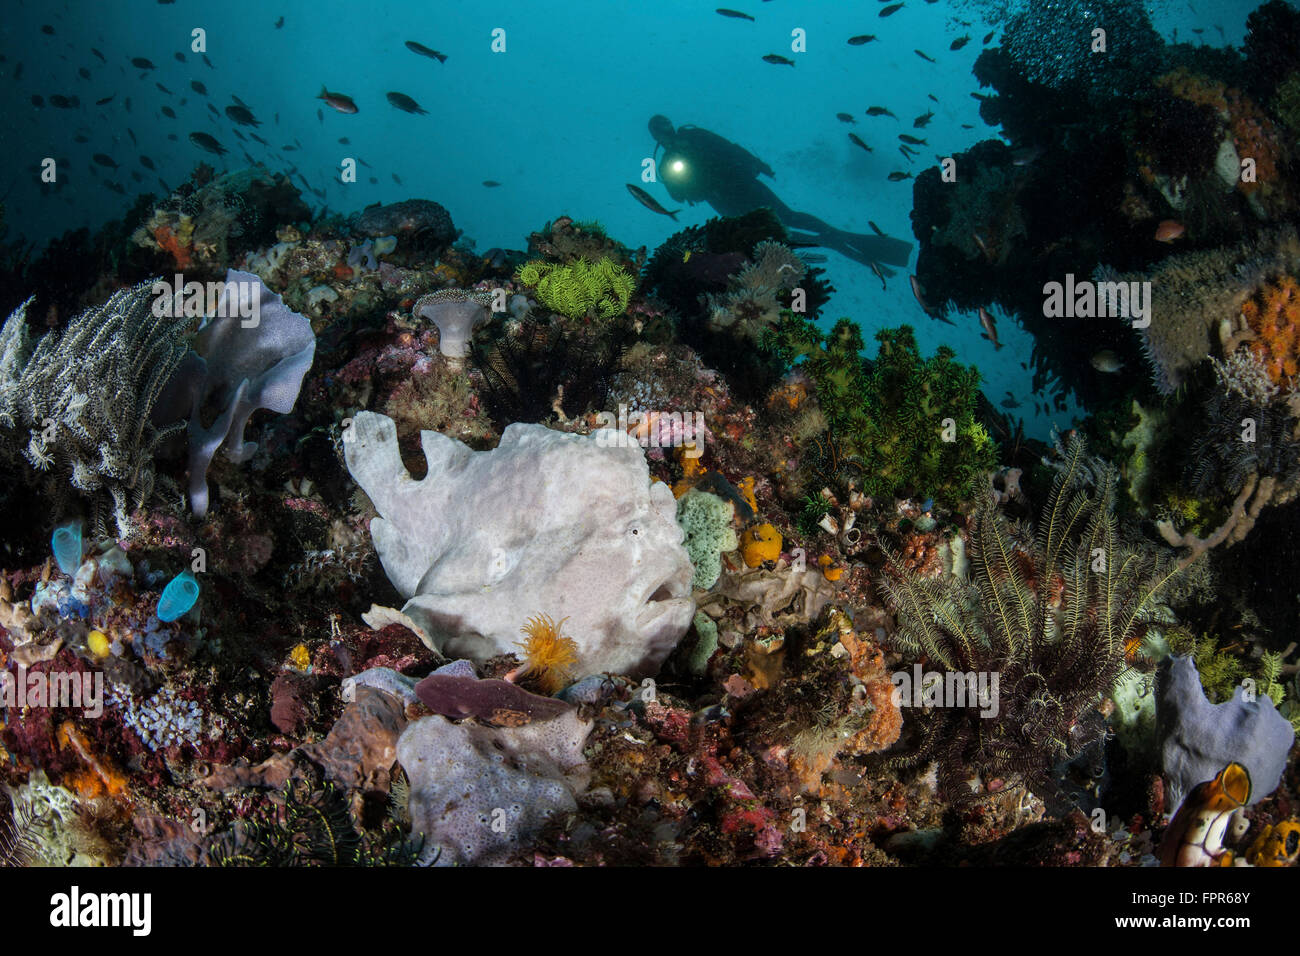 A giant frogfish (Antennarius commerson) blends into its reef surroundings in Komodo National Park, Indonesia. This beautiful ar Stock Photo